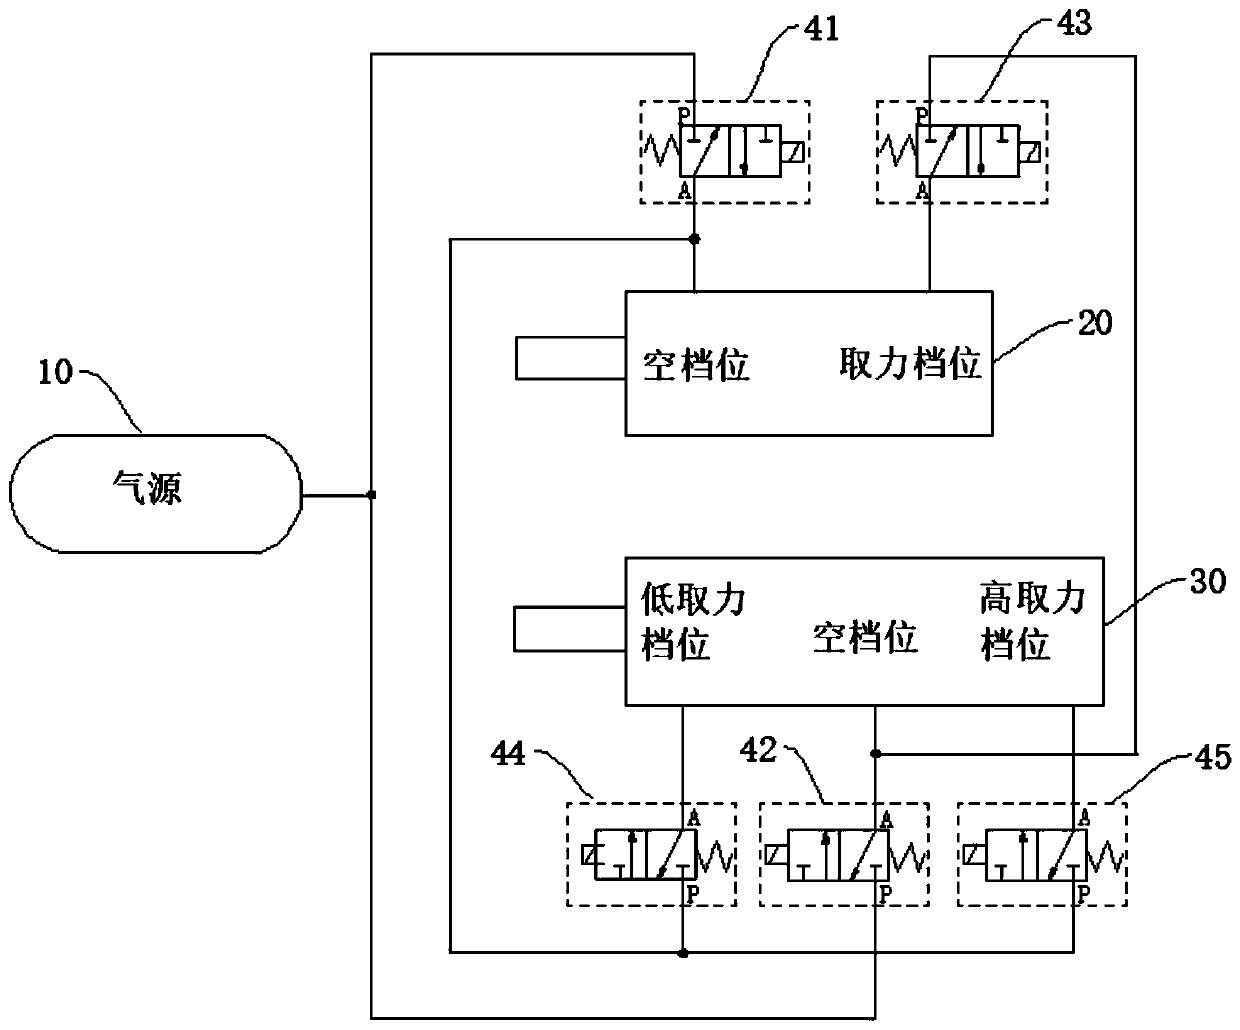 Boarding power take-off control system, method and engineering machinery